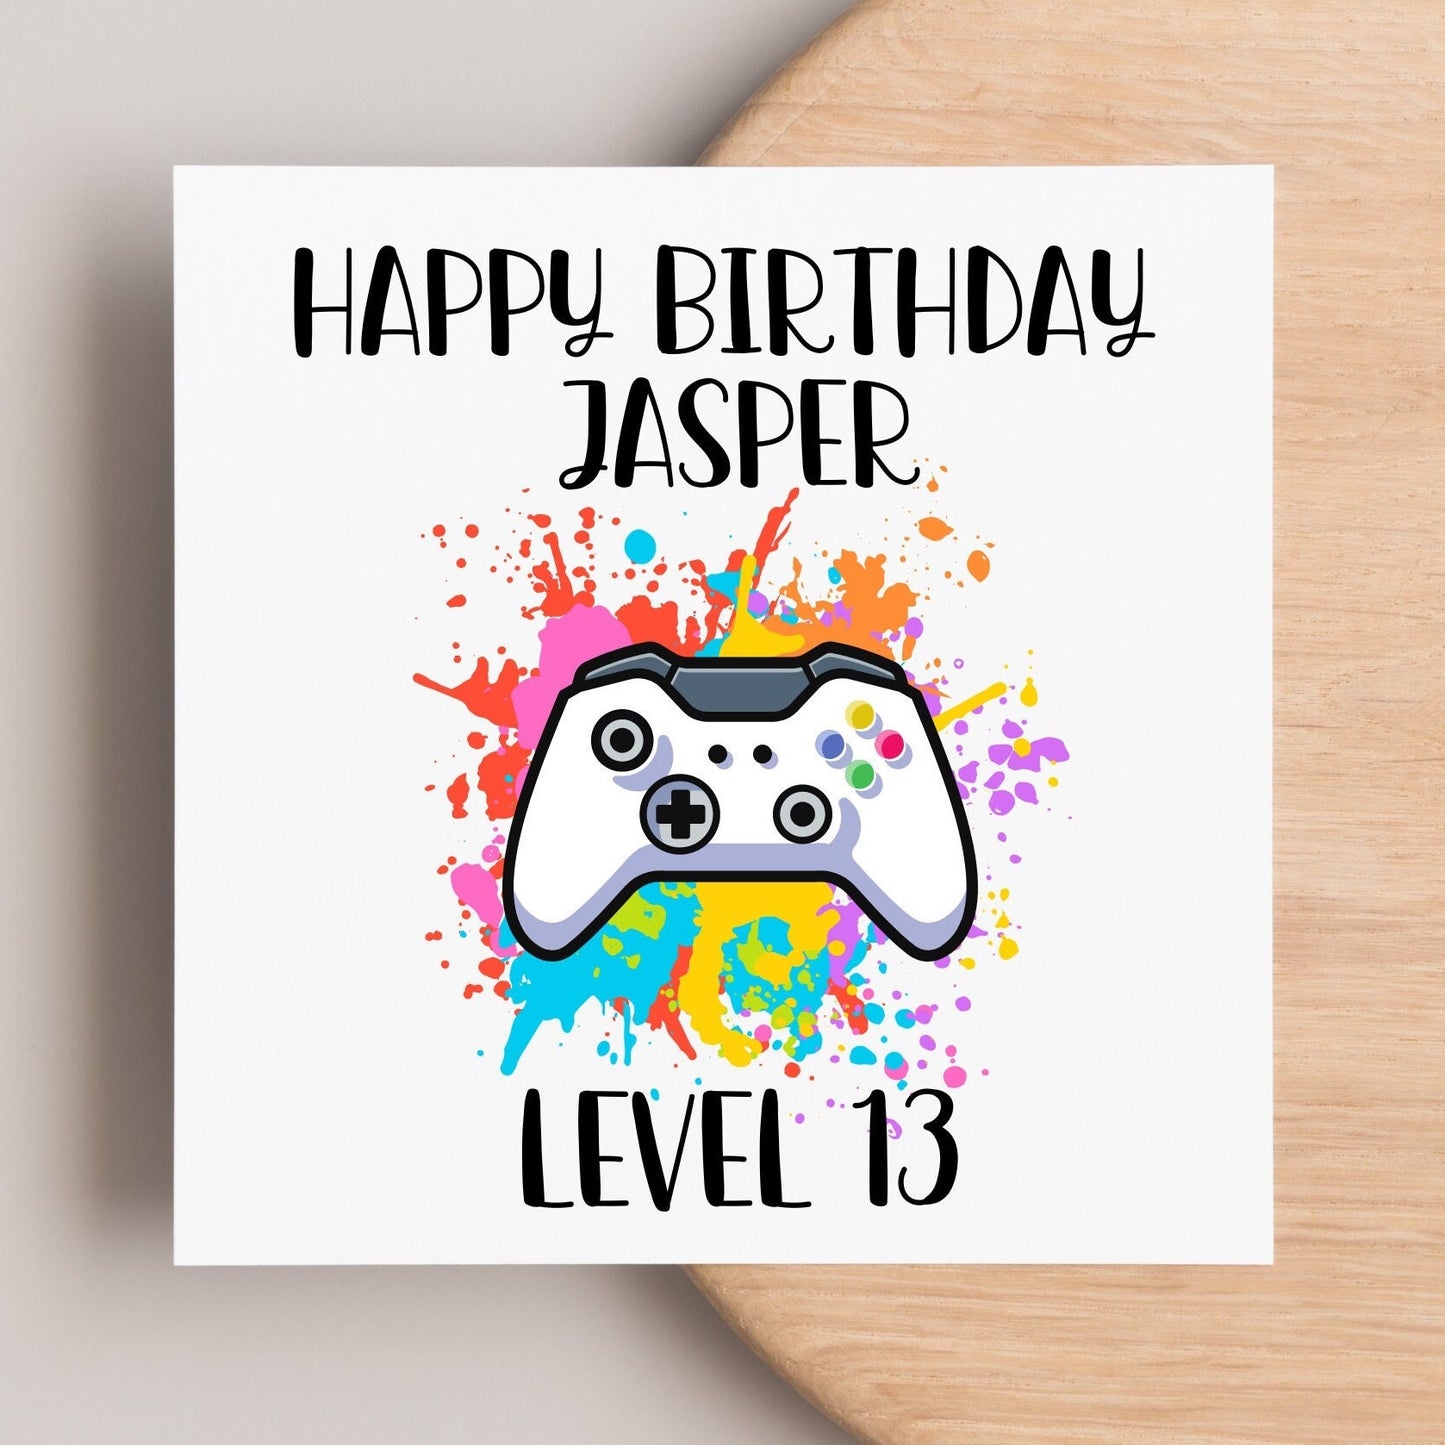 Gaming birthday card, personalised video gamer theme card for teens, brother, son, grandson bday cards